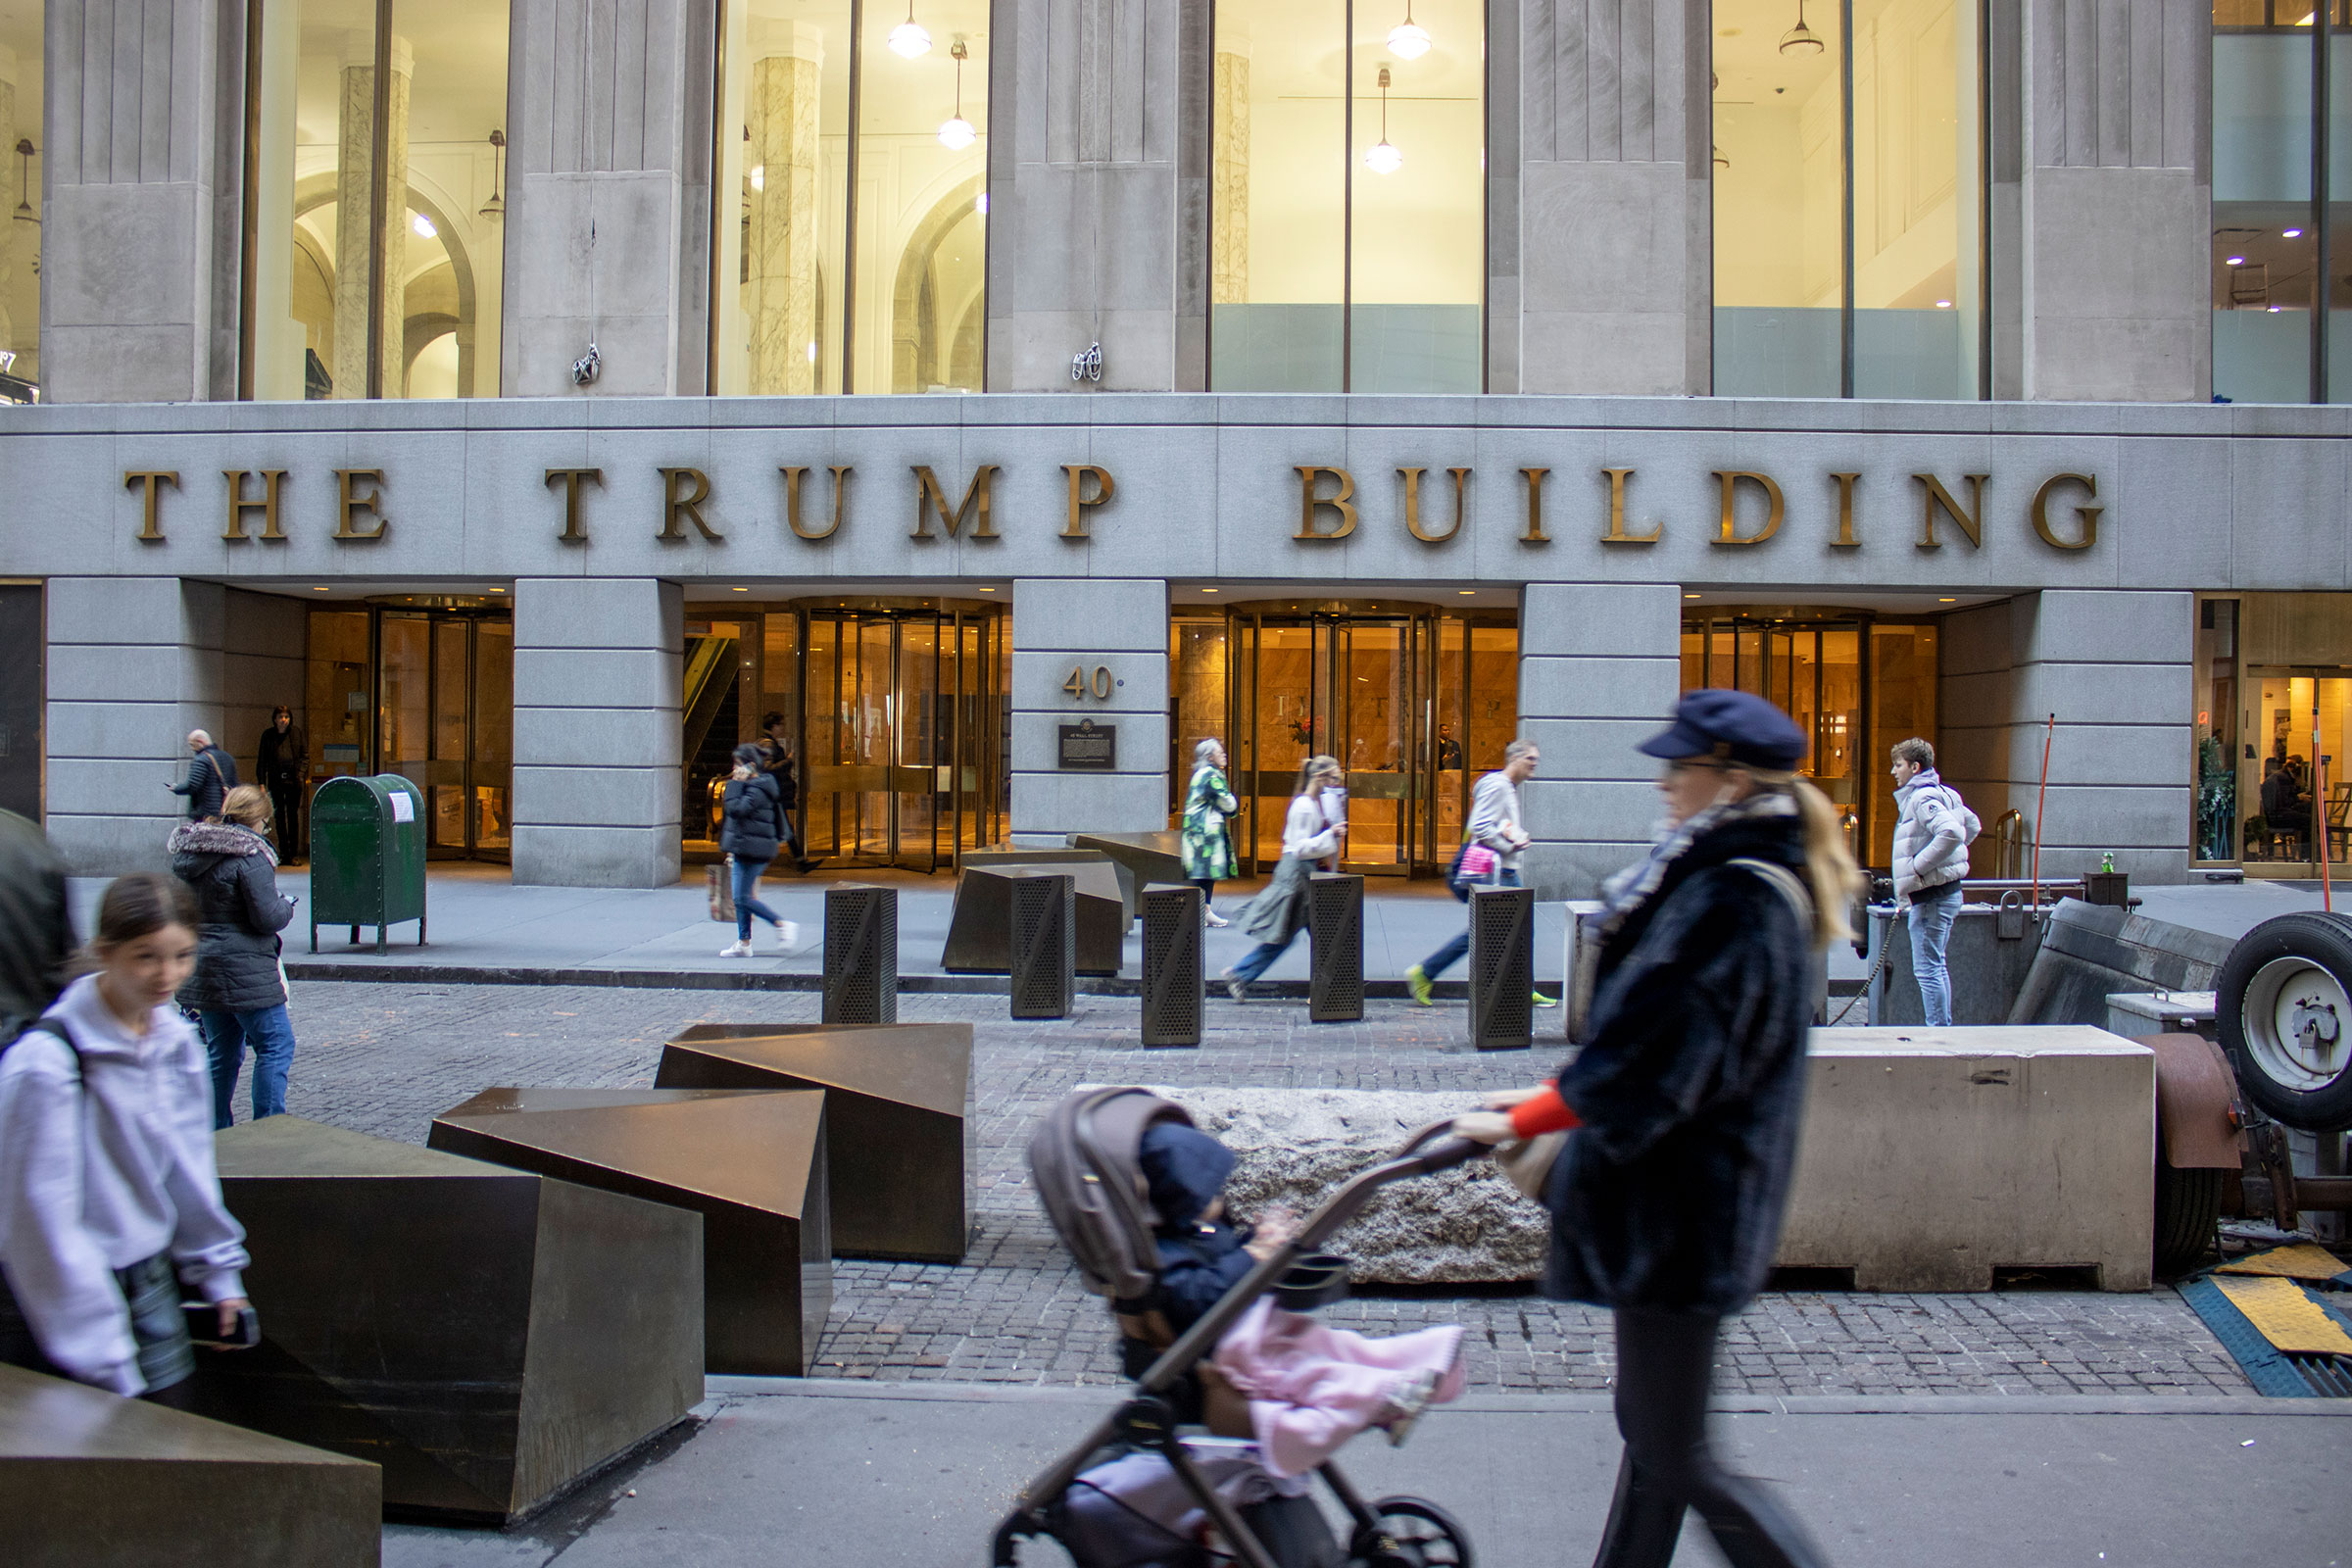 People walk by The Trump Building office building at 40 Wall Street in New York City on Friday, November 3.